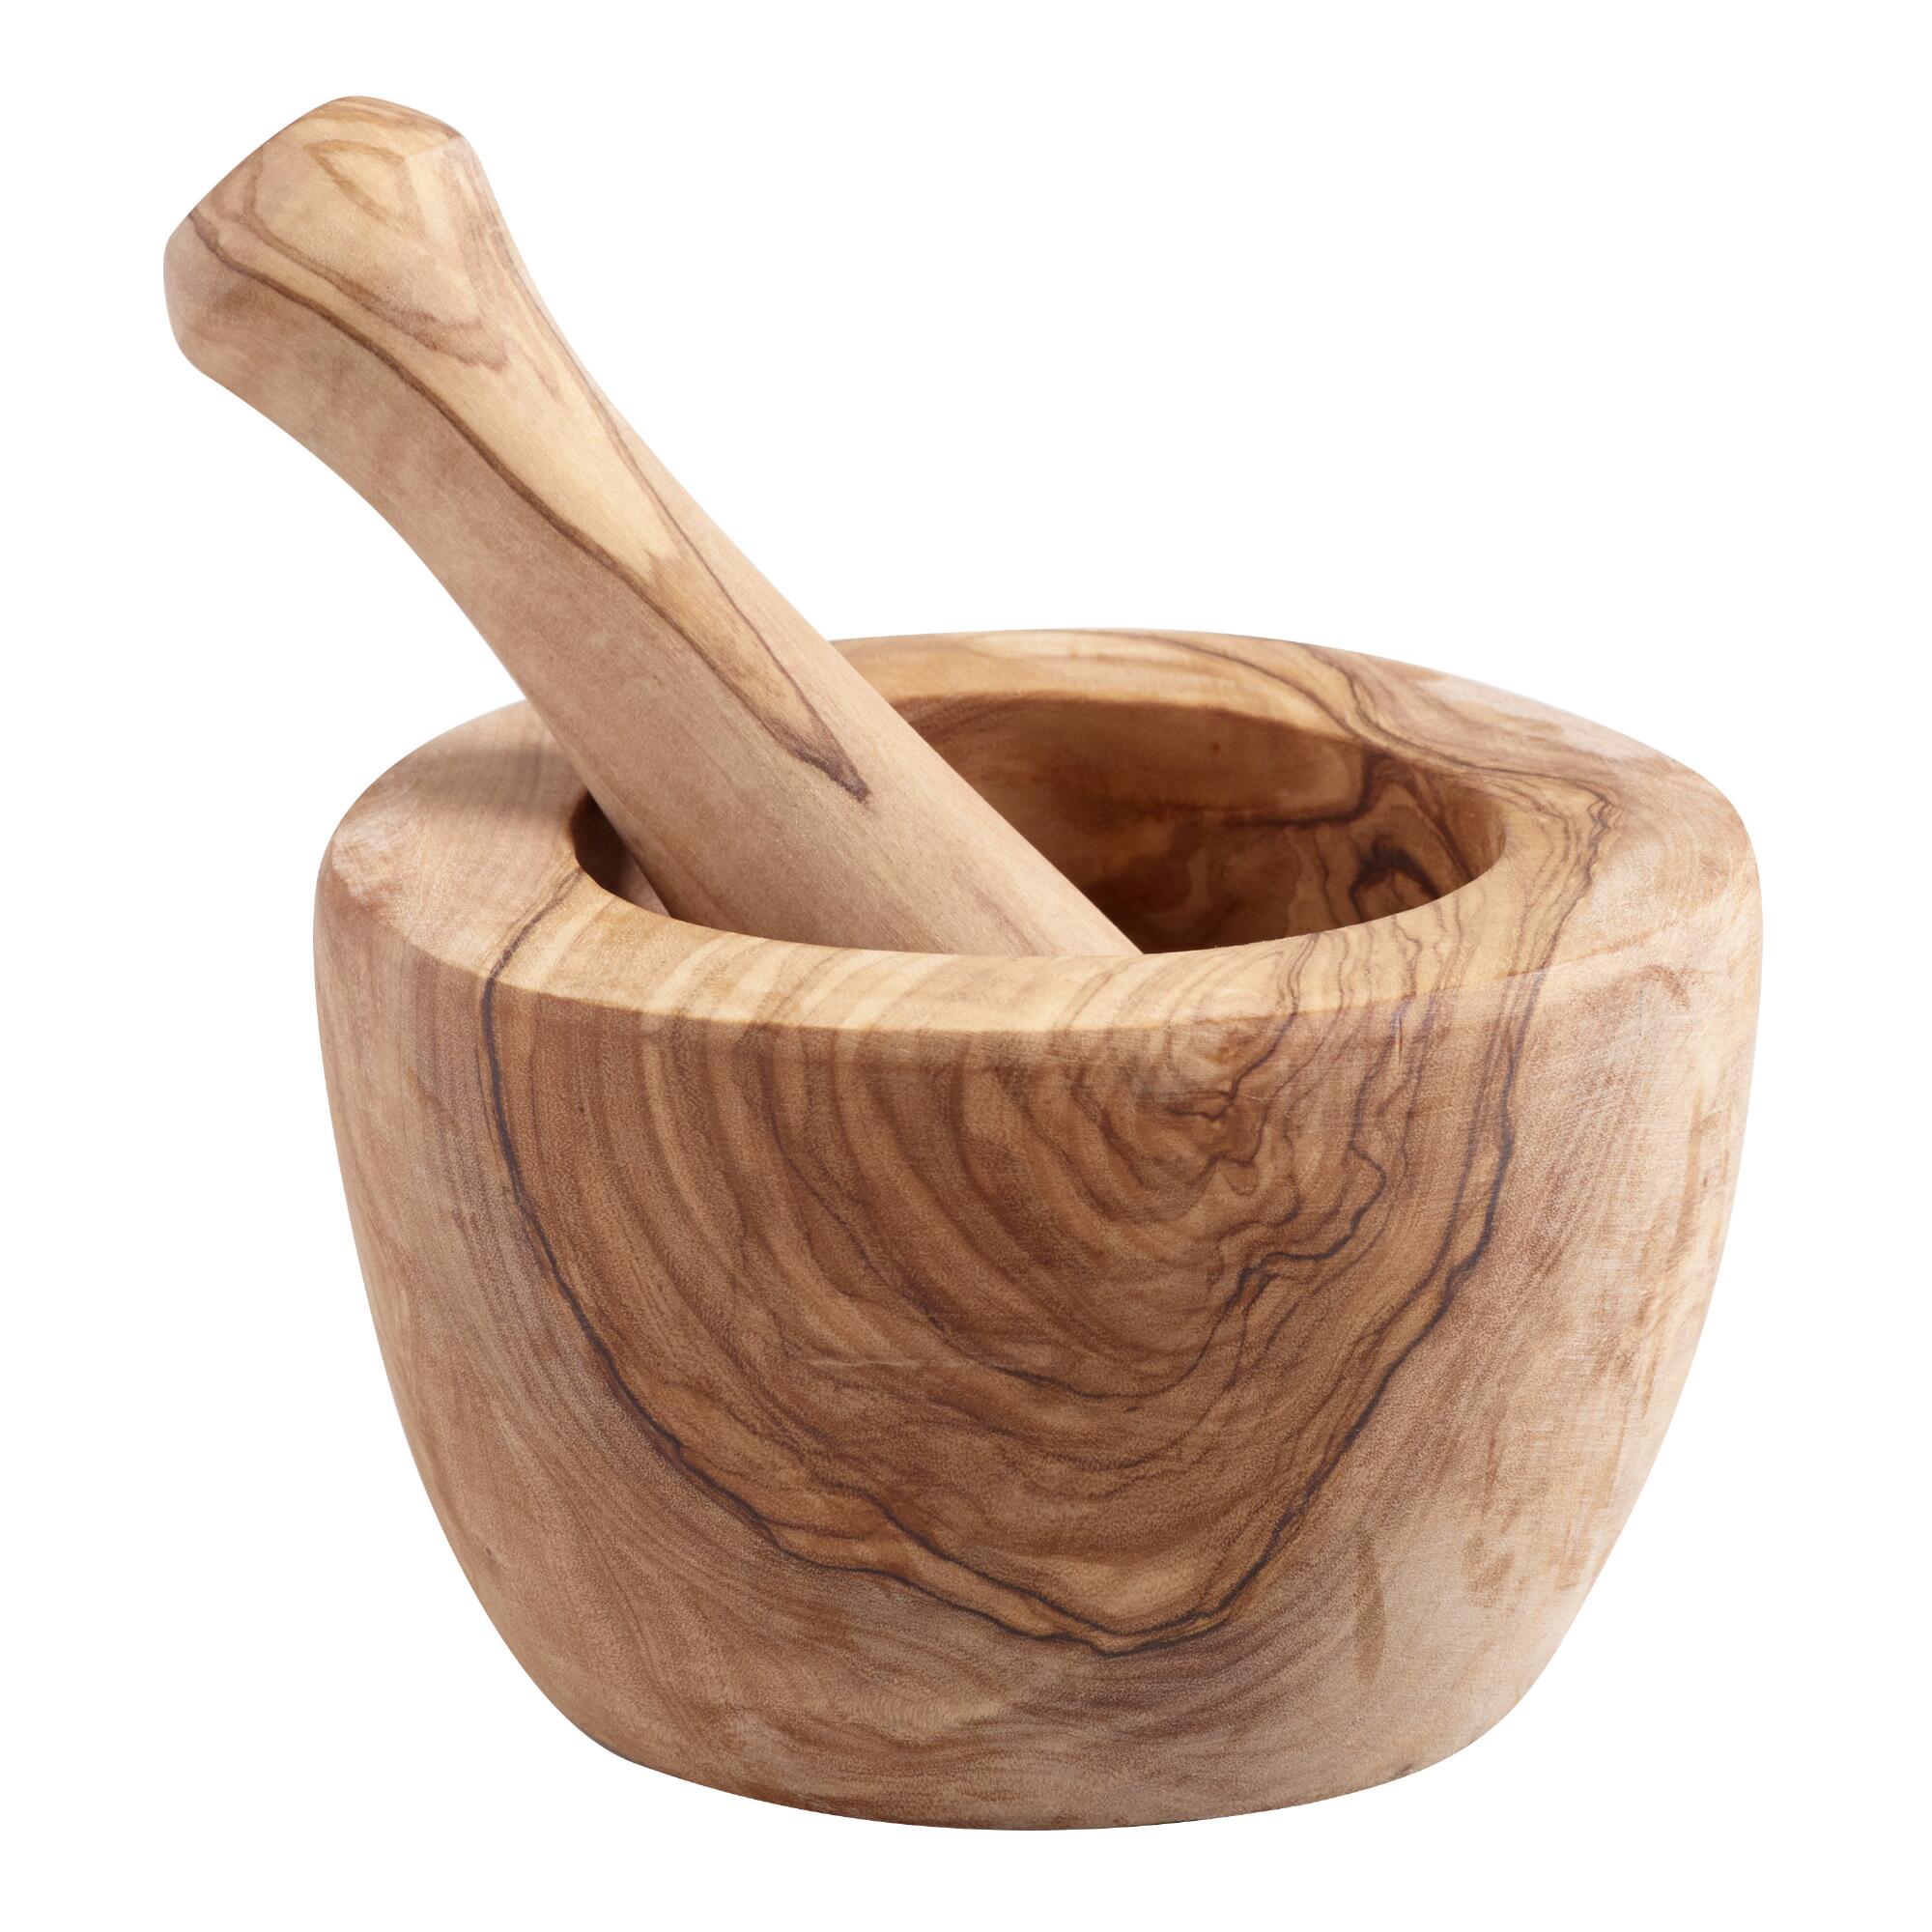 Olive Wood Mortar And Pestle by World Market